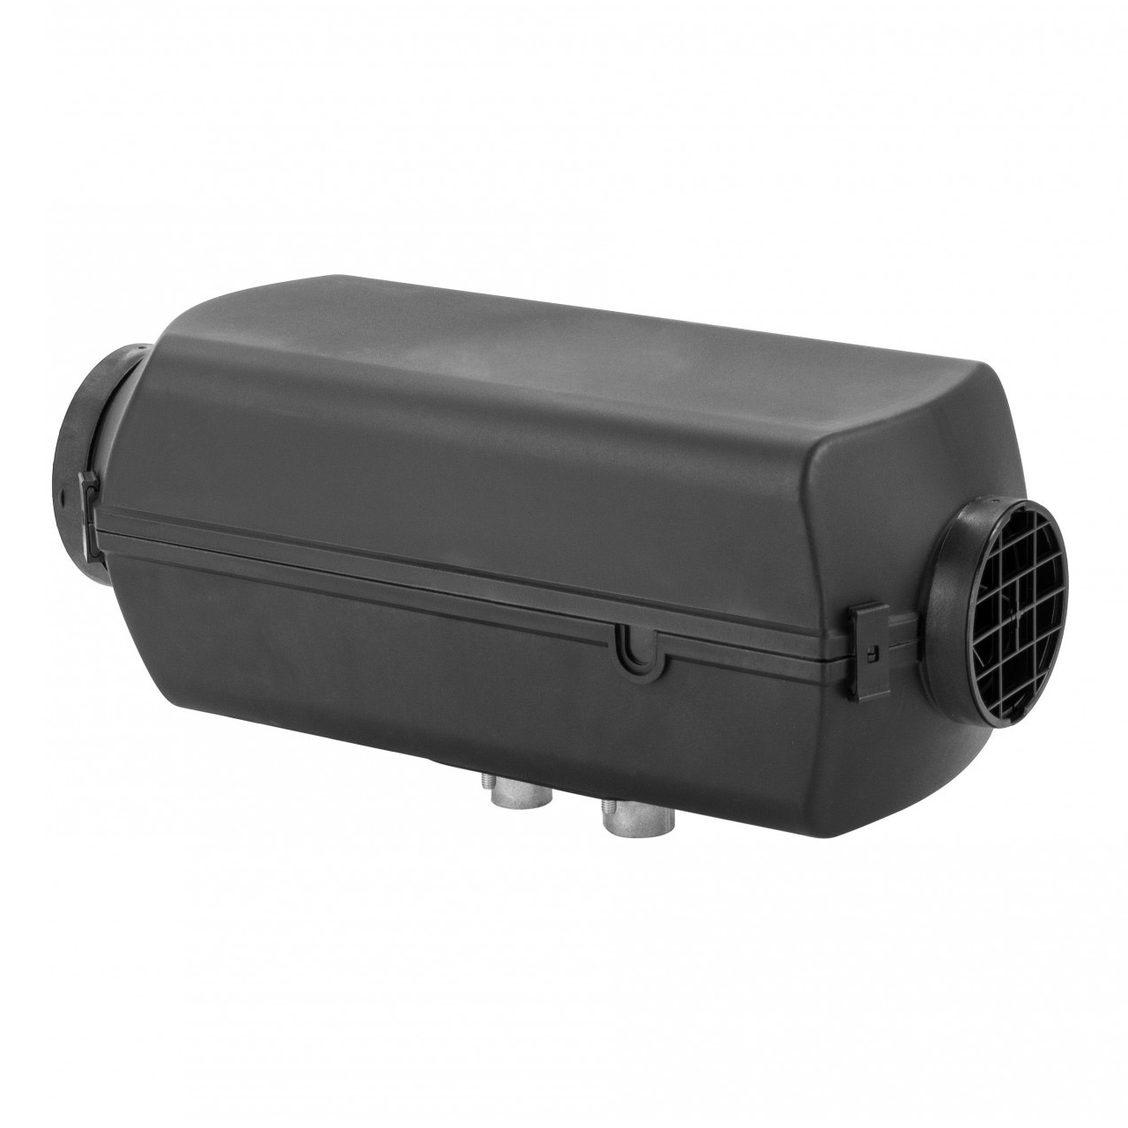 Our best-selling camper van air heater is now available for gas vehicles!